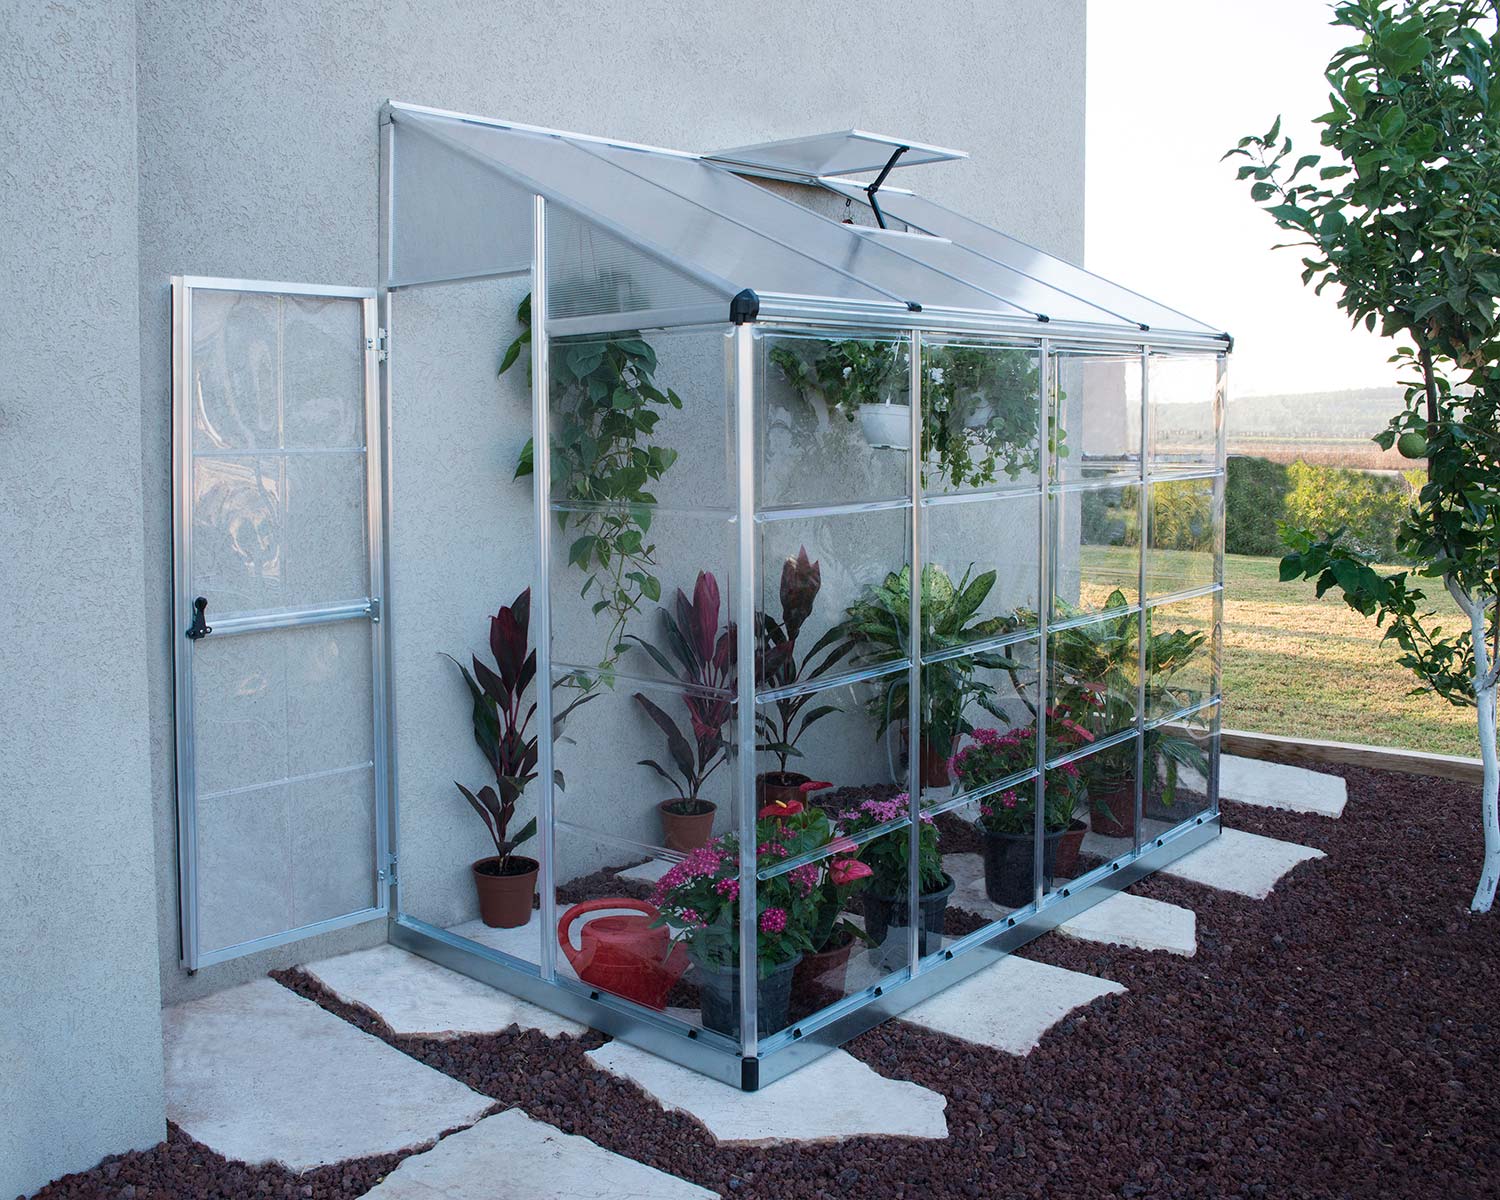 Lean To Greenhouse 8' x 4' Kit - Silver Structure & Polycarbonate Panels